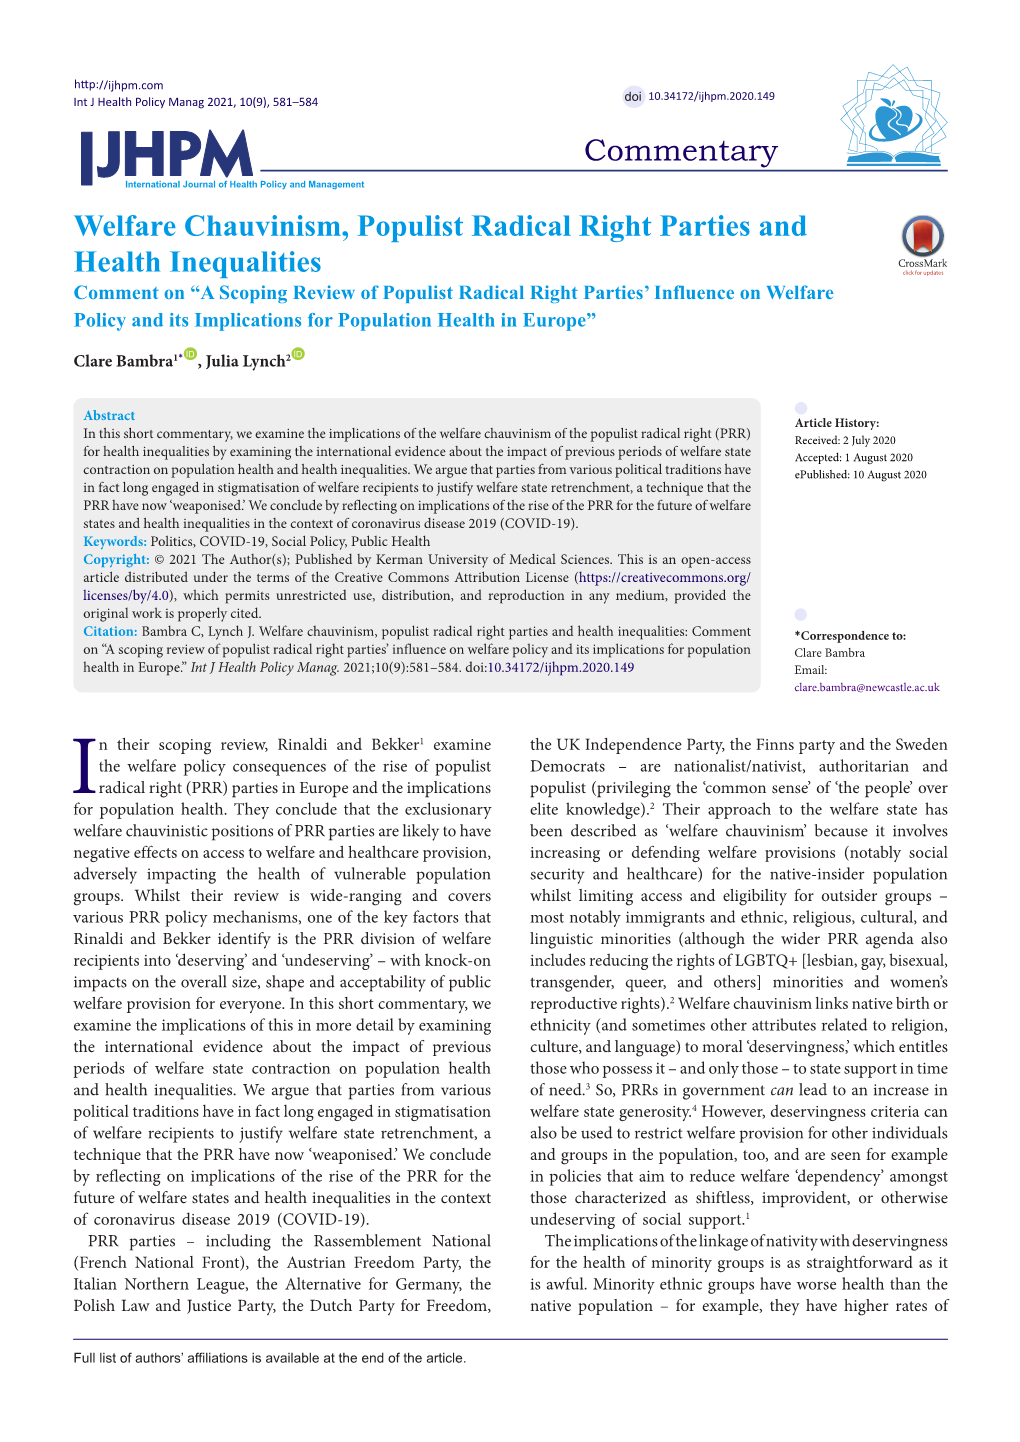 A Scoping Review of Populist Radical Right Parties’ Influence on Welfare Policy and Its Implications for Population Health in Europe”